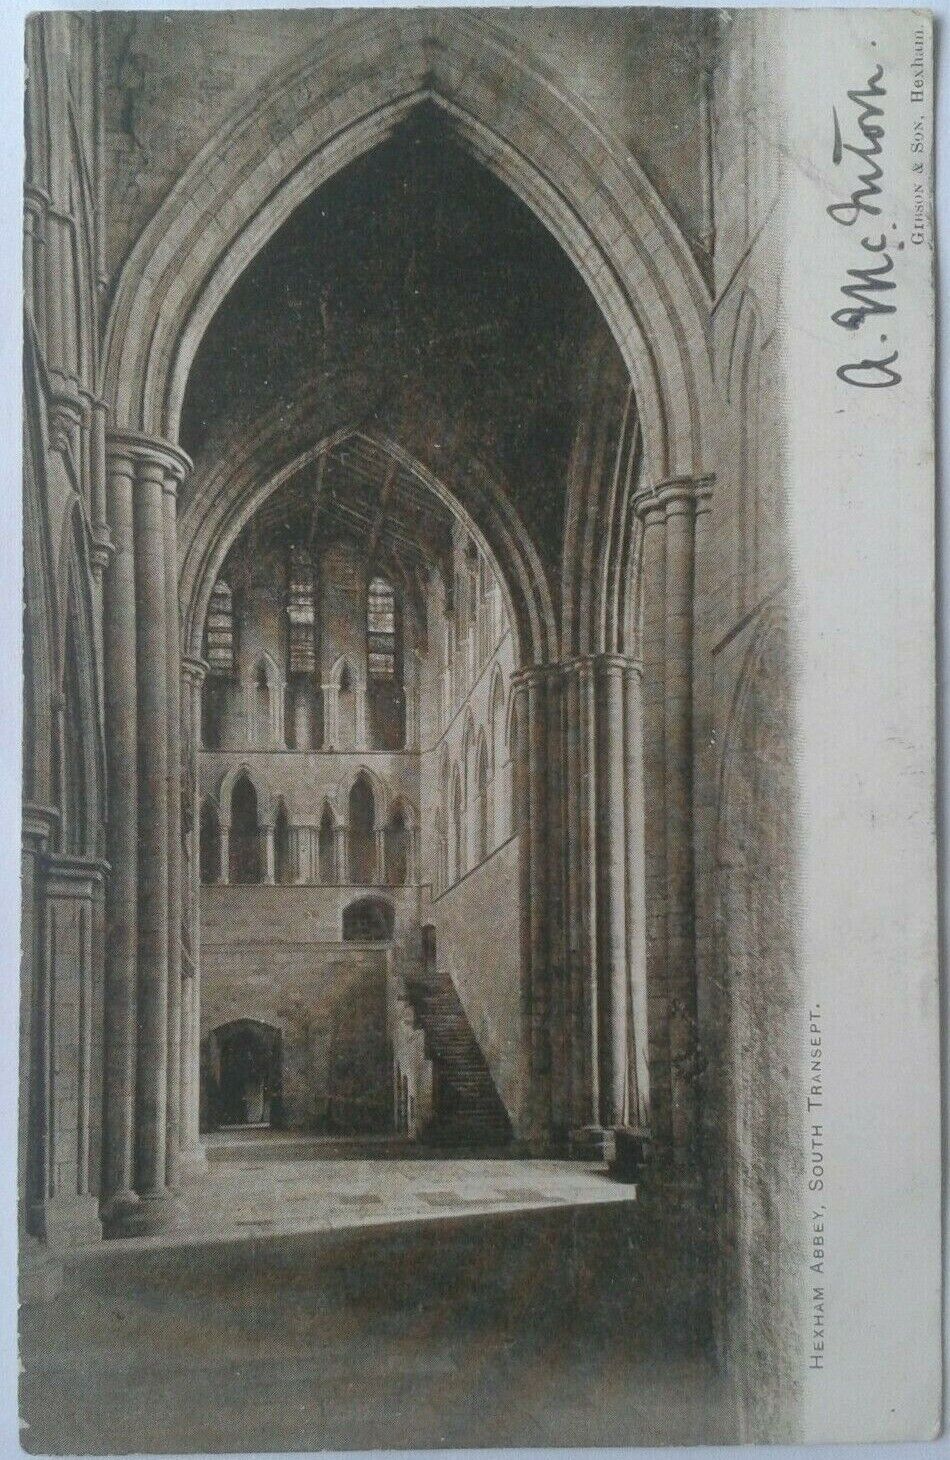 House Clearance - 1 OLD POSTCARD OF HEXHAM ABBEY , SOUTH TRANSEPT  postally used 1902